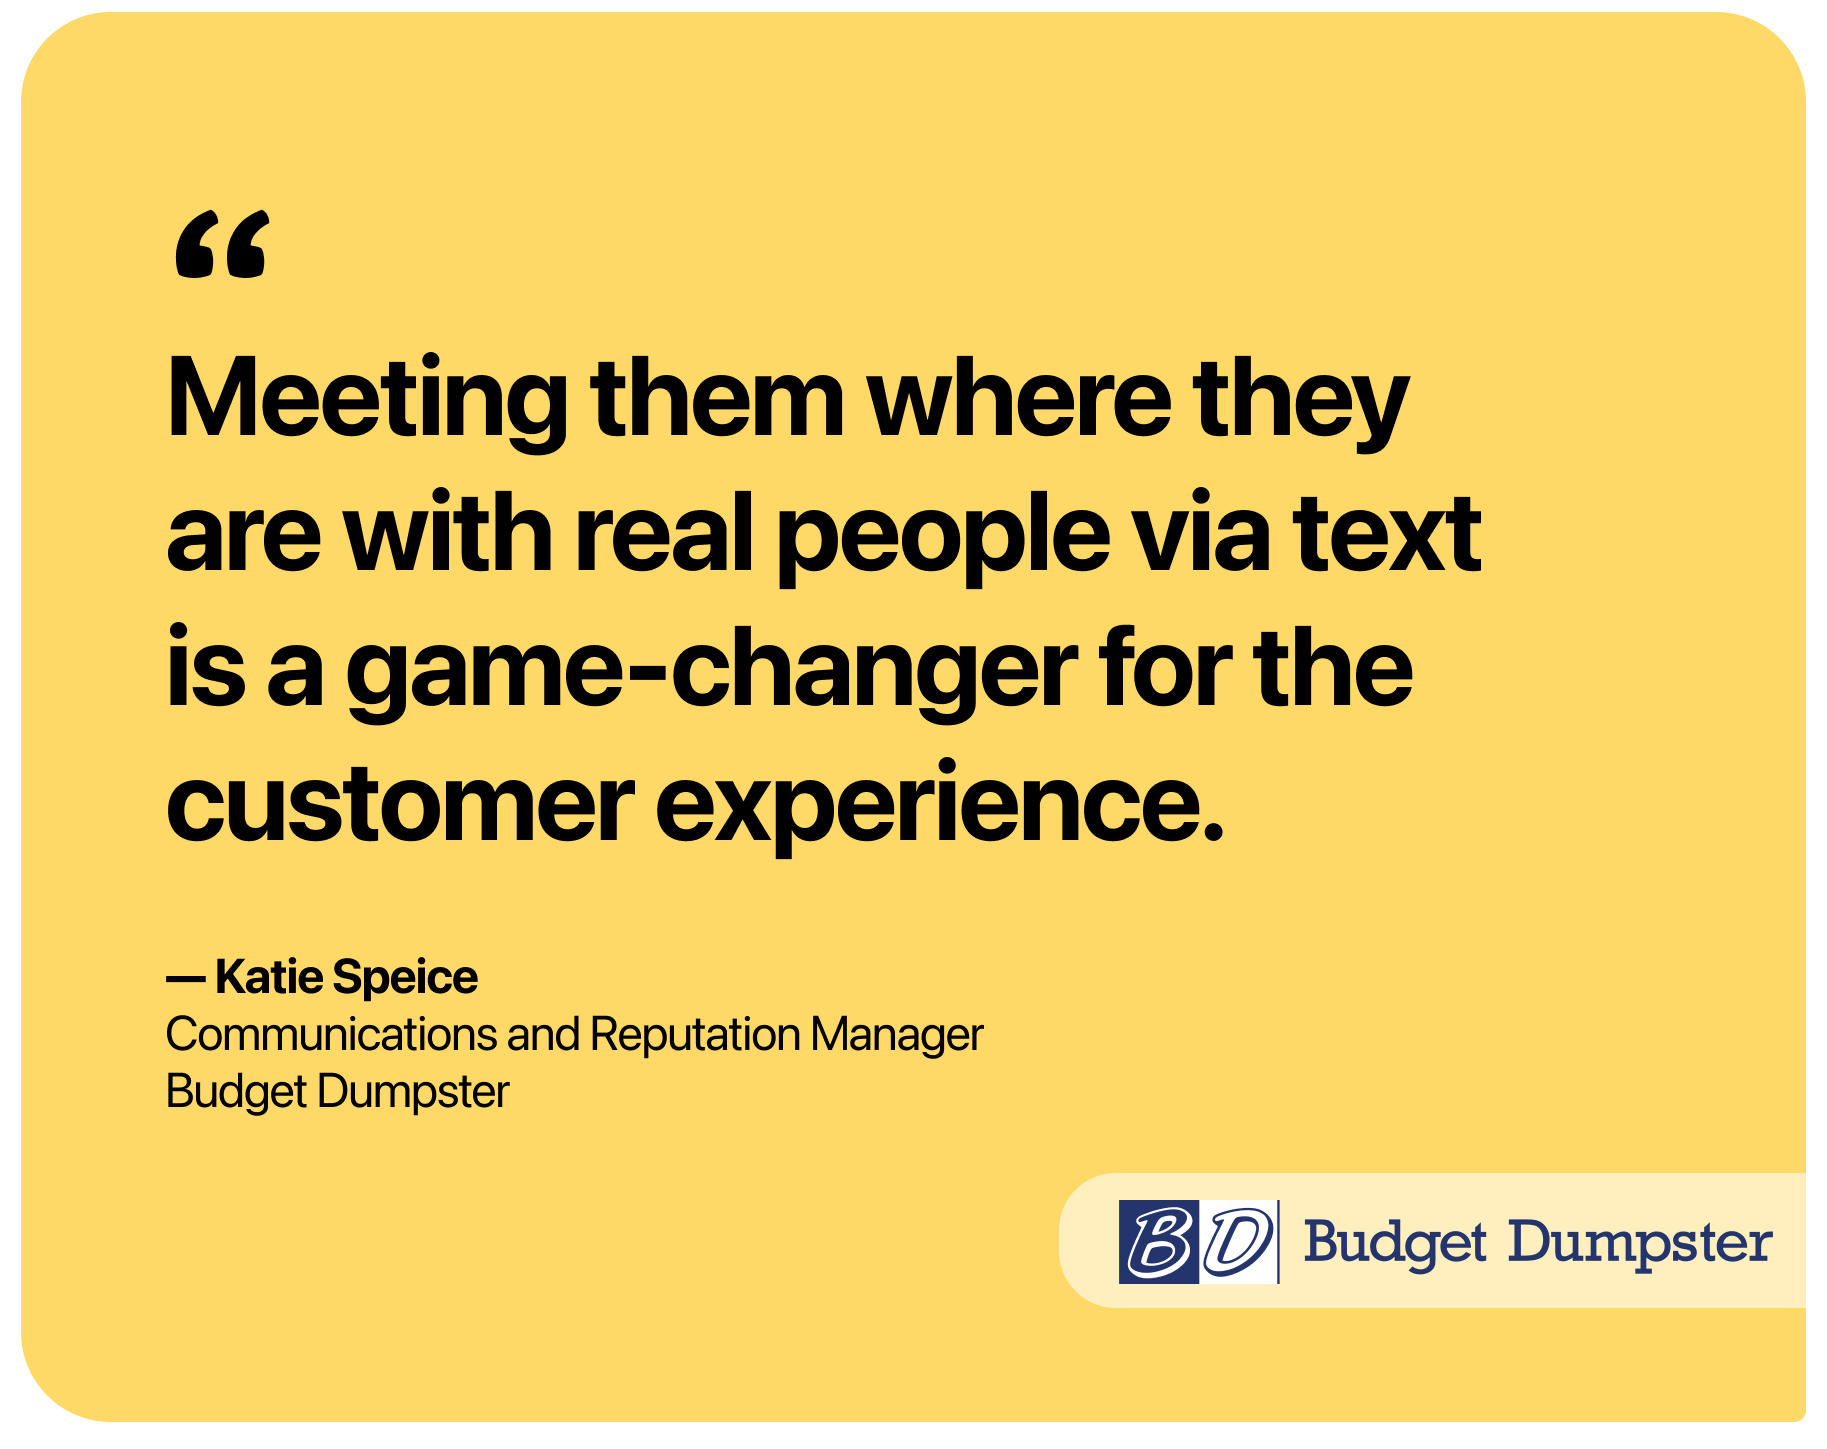 Quote reading: Meeting them where they are with real people via text is a game-changer for the customer experience.